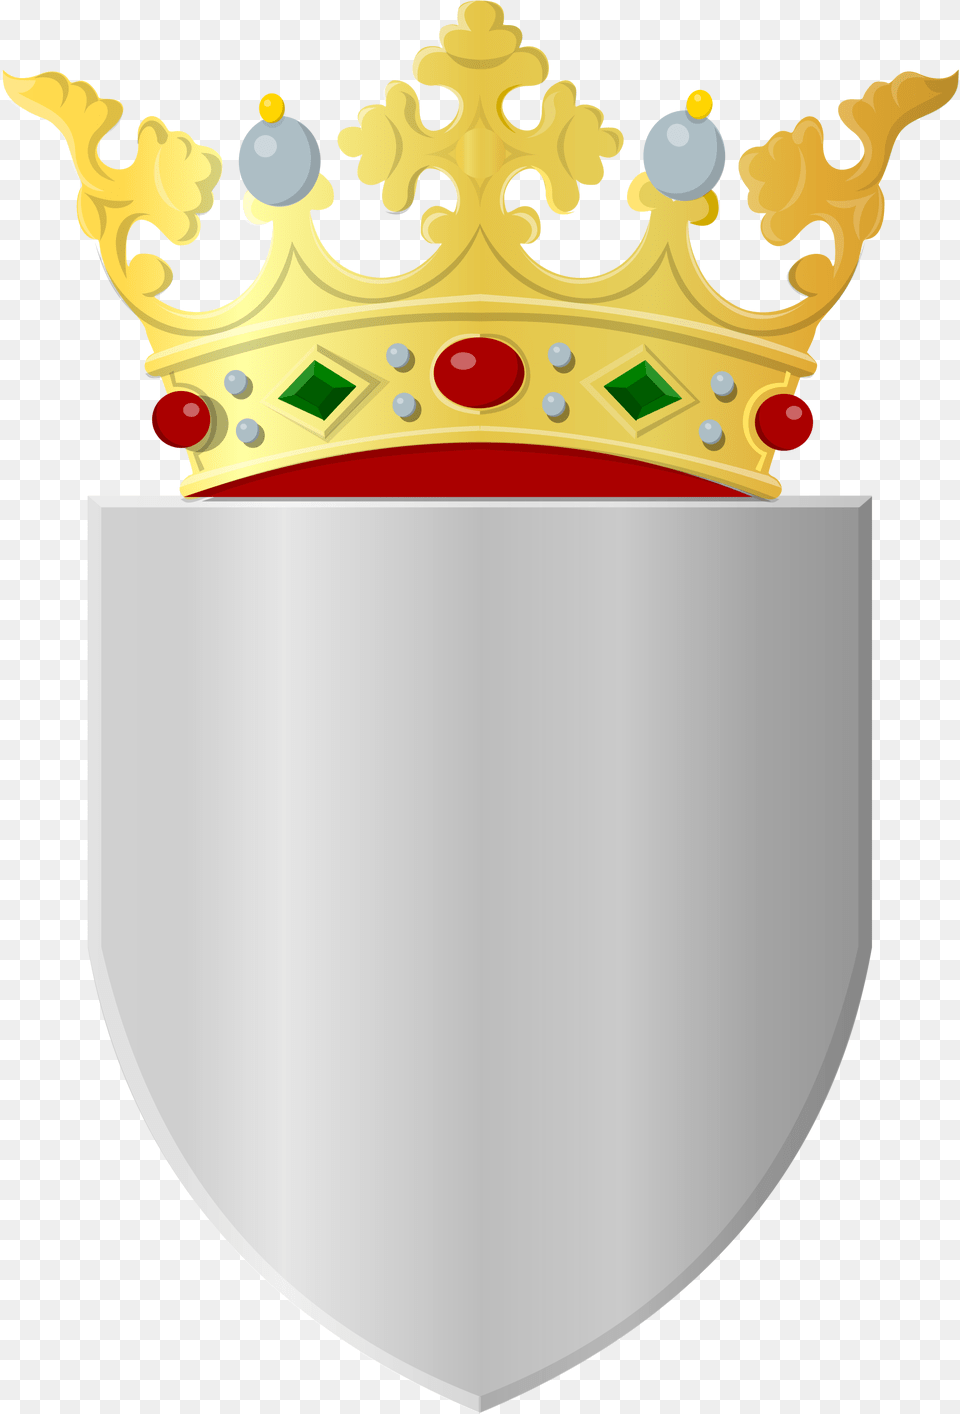 Filesilver Shield With Golden Crownsvg Wikimedia Commons Shield Crown Accessories, Jewelry, Armor Free Transparent Png